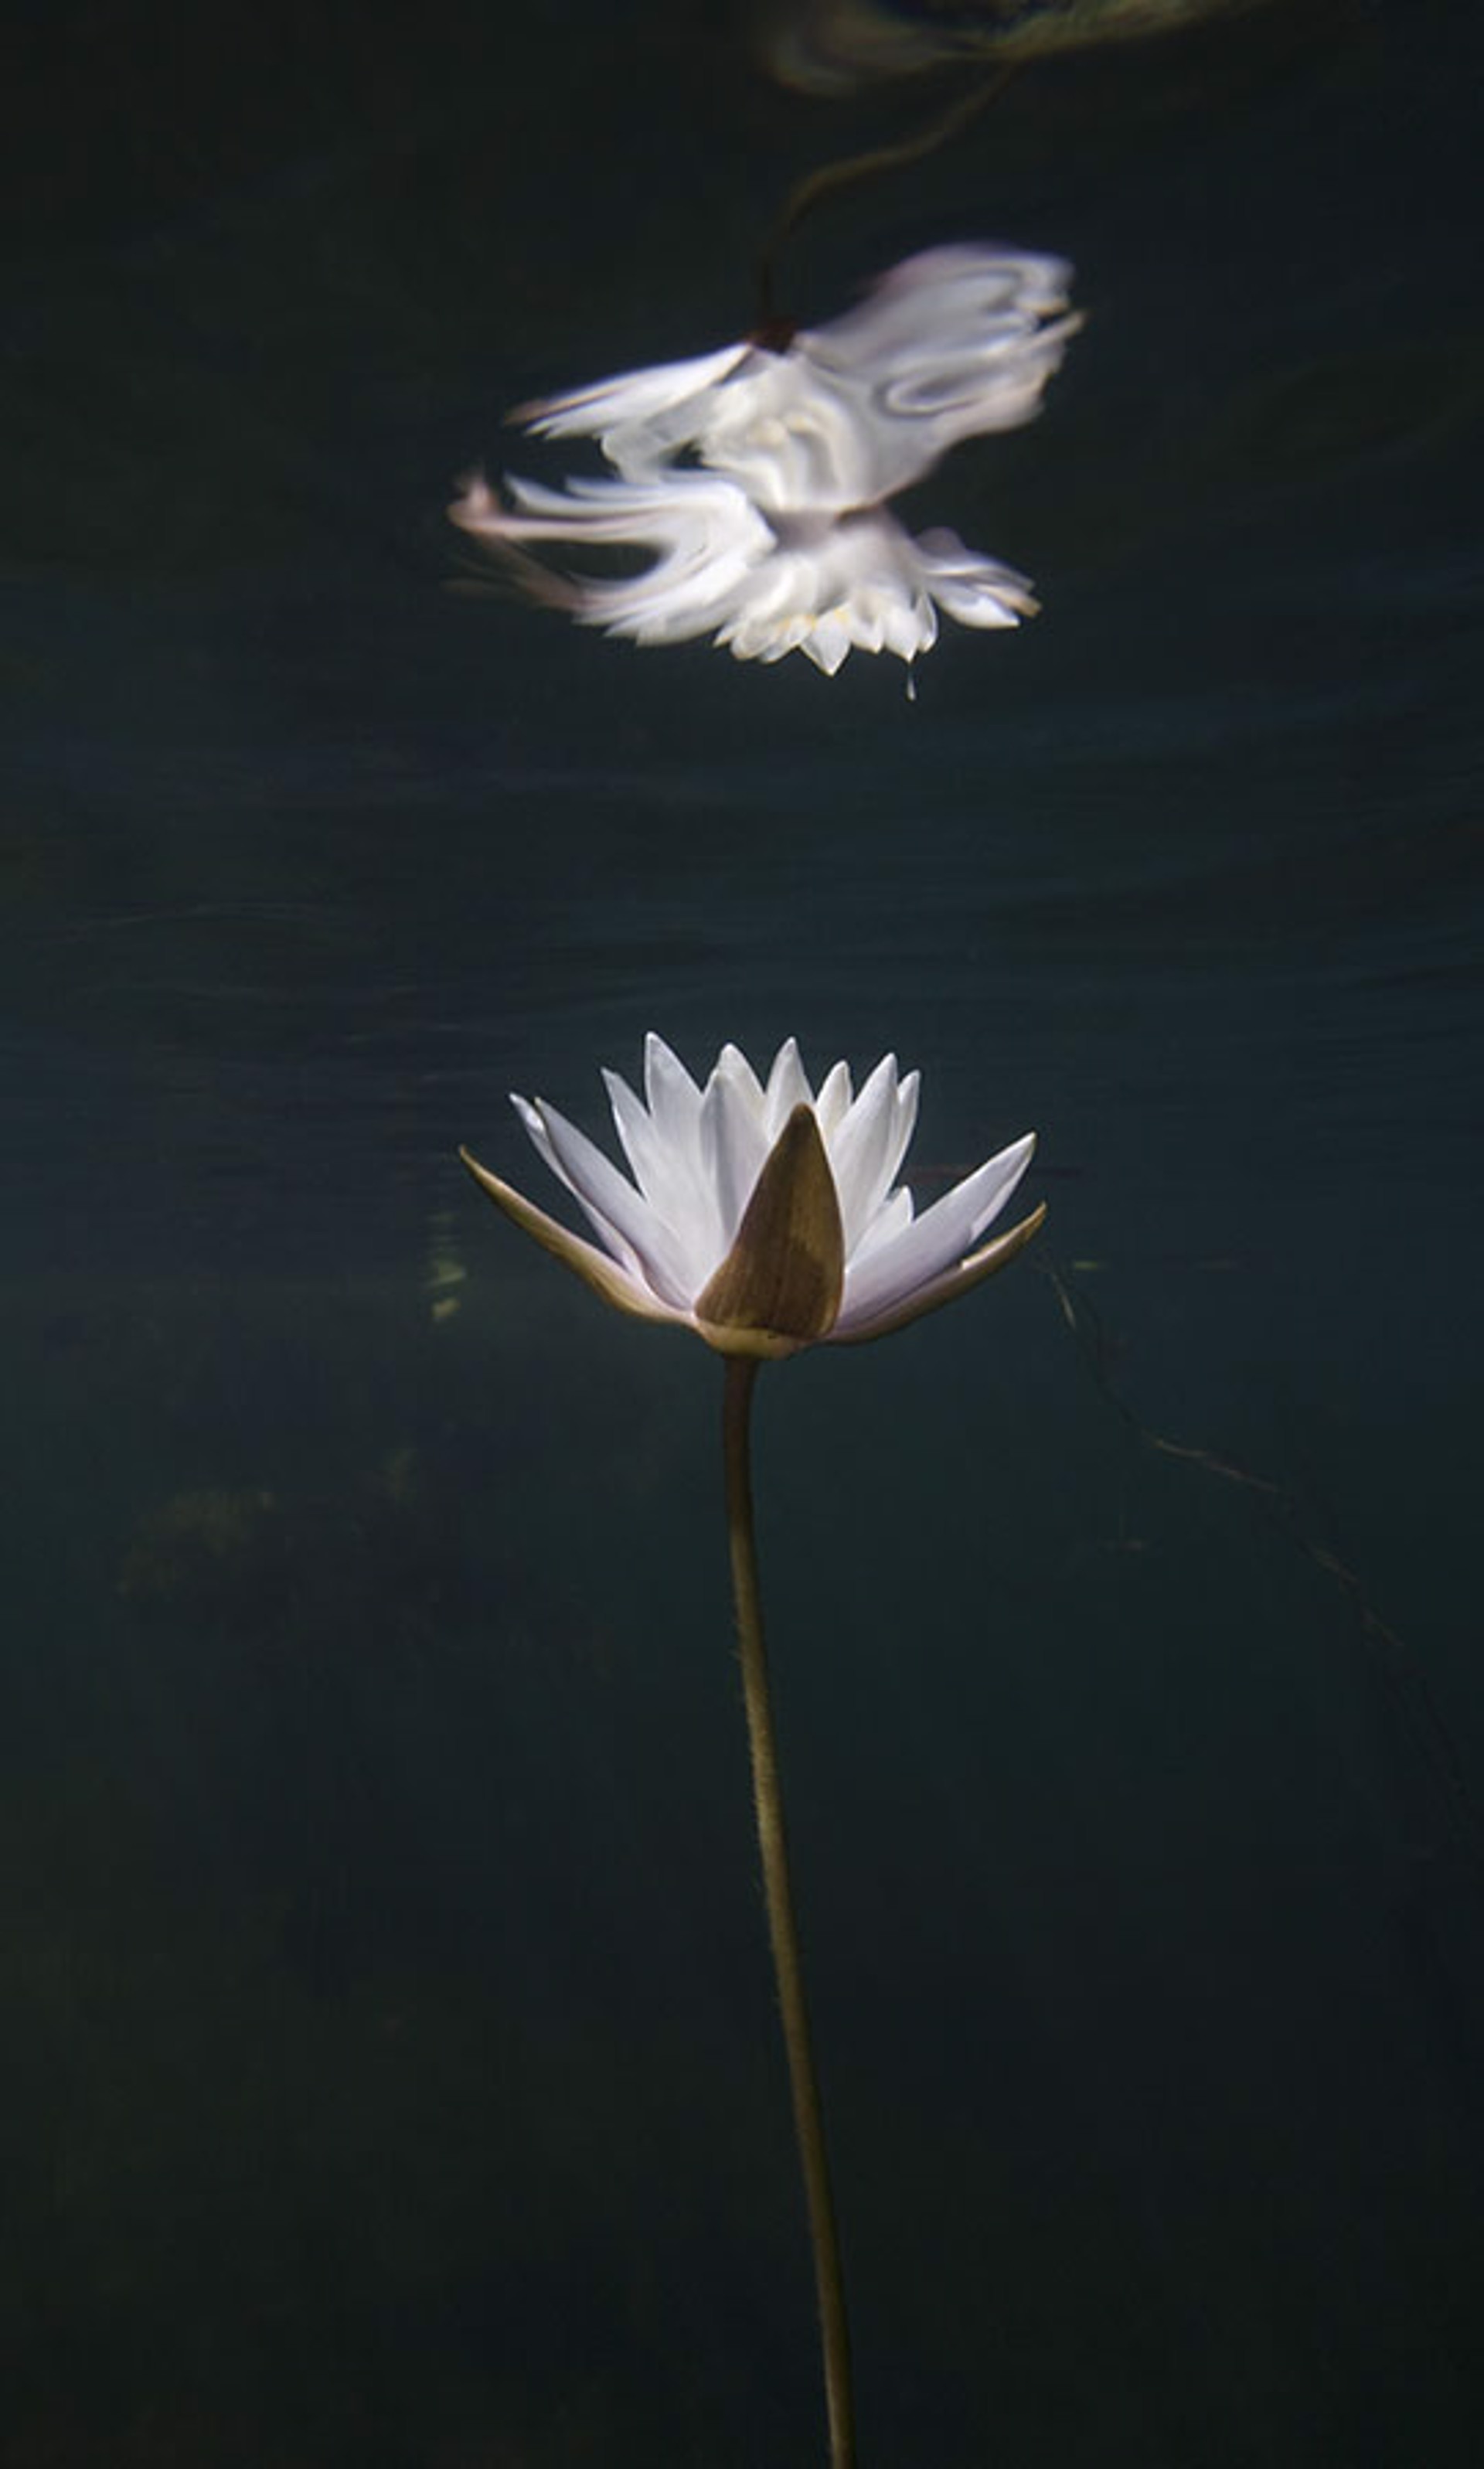 WATER LILY STUDY NO. 19 by WILLIAM SCULLY